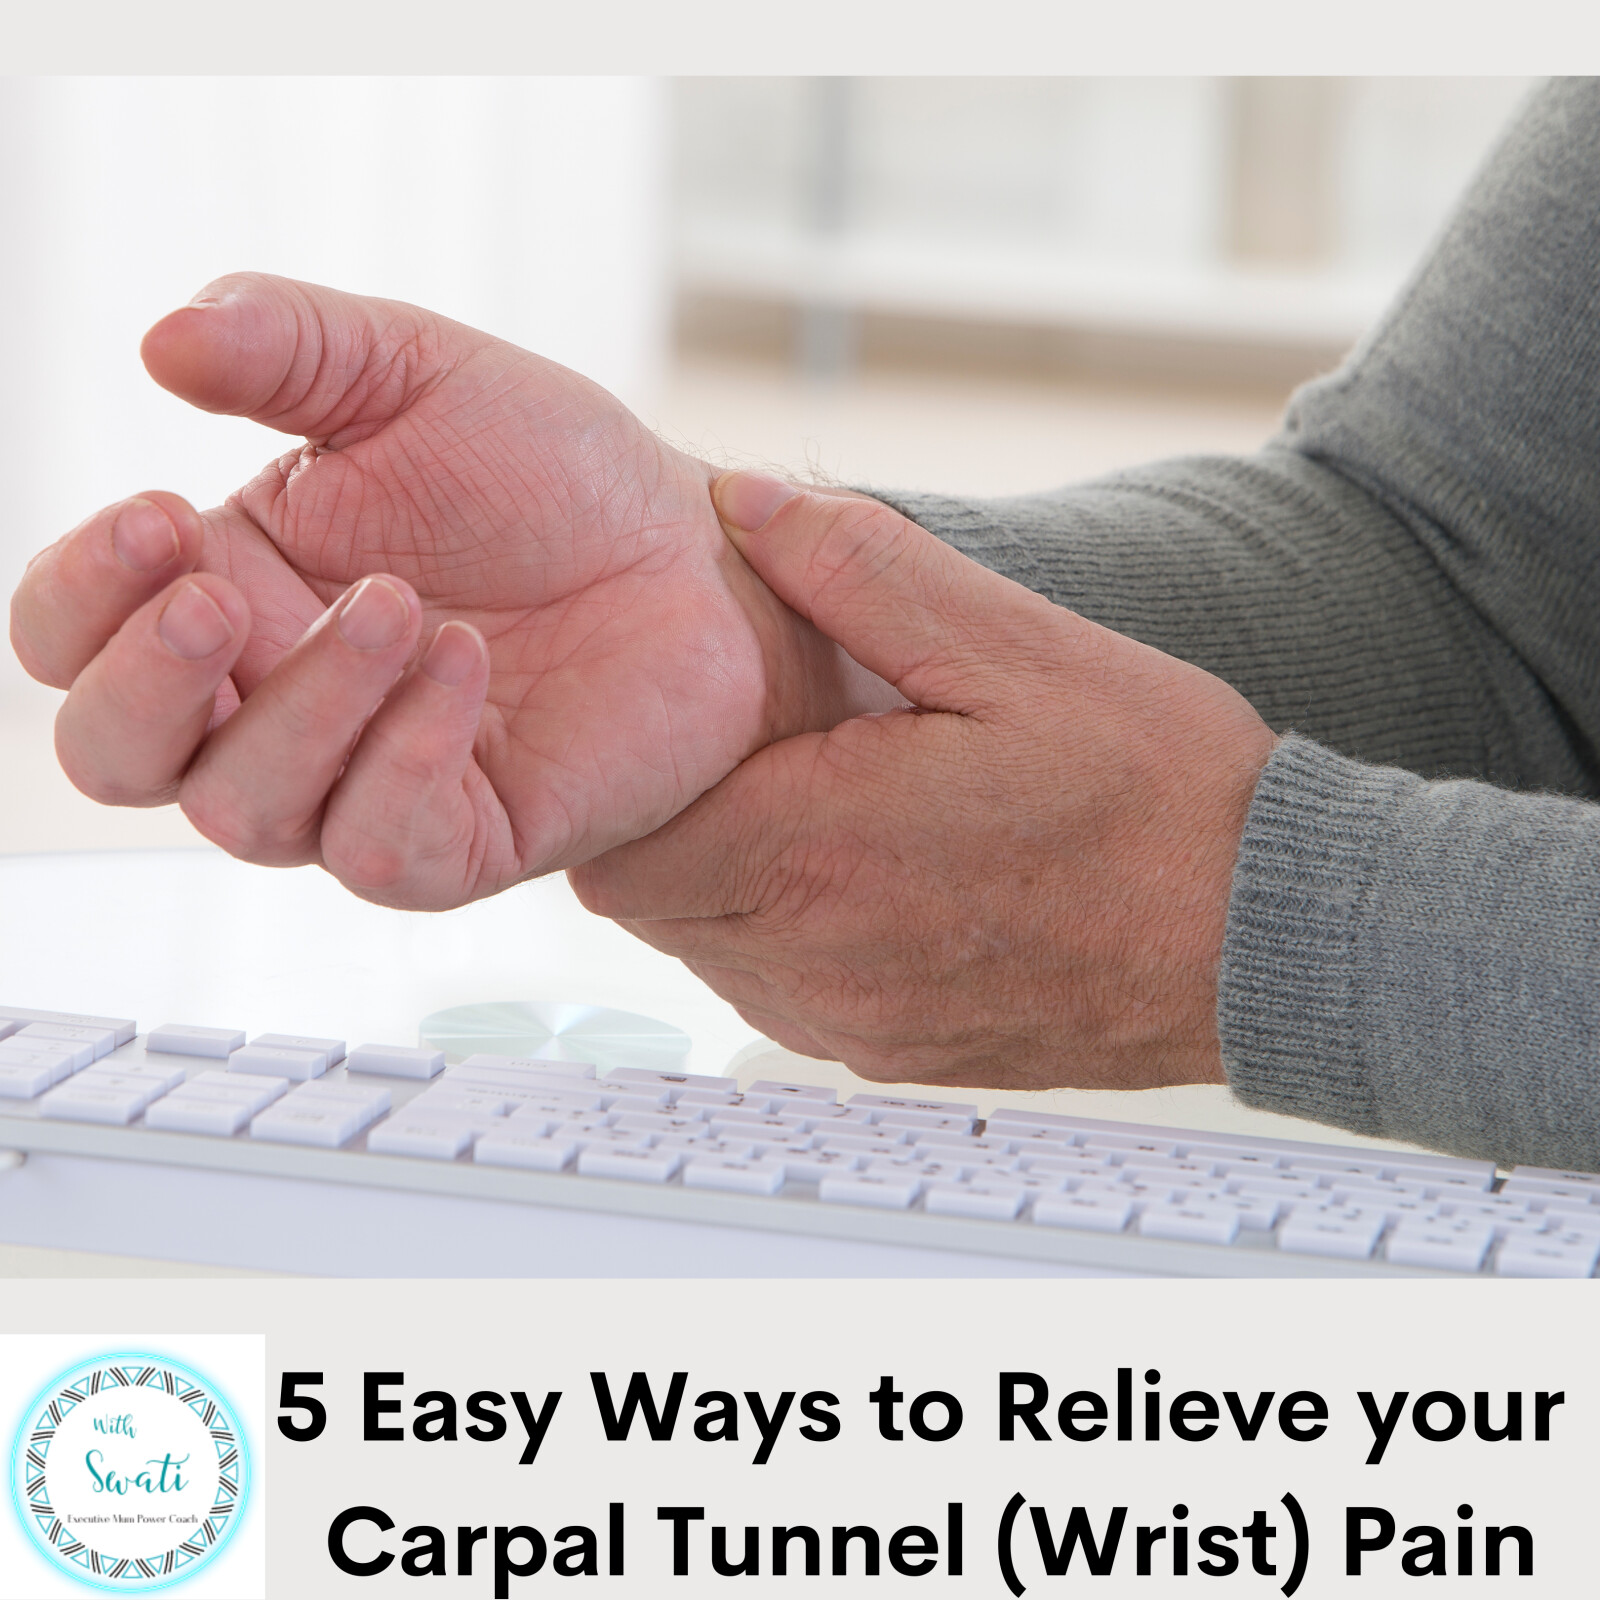 5 Easy Ways to Relieve your Carpal Tunnel (Wrist) Pain